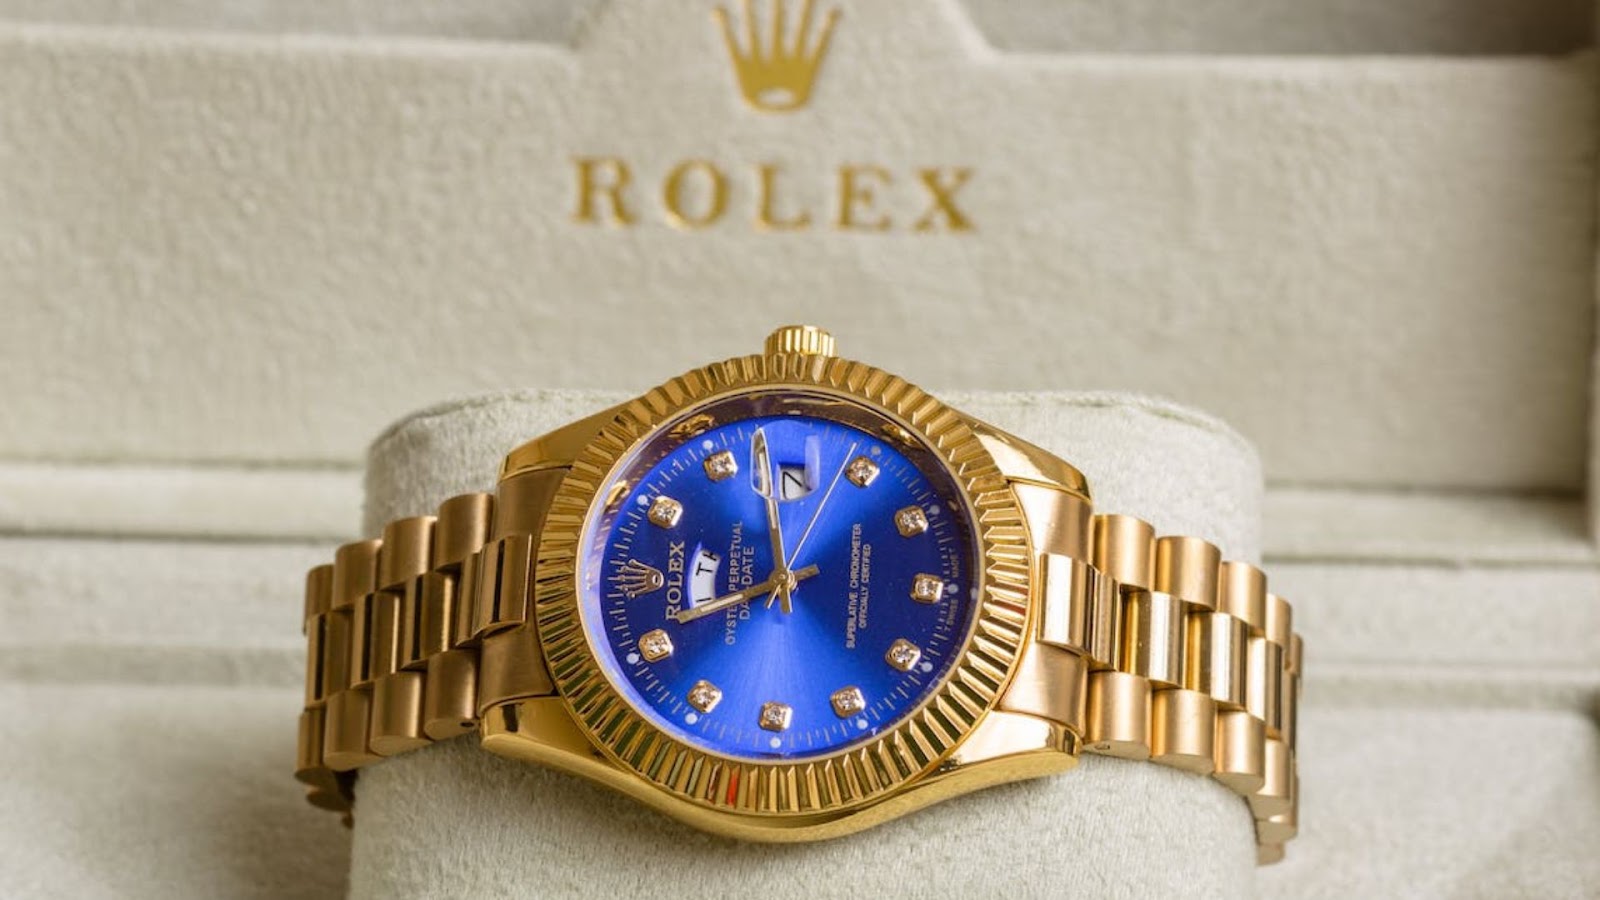 How Much Does A Rolex Weigh?